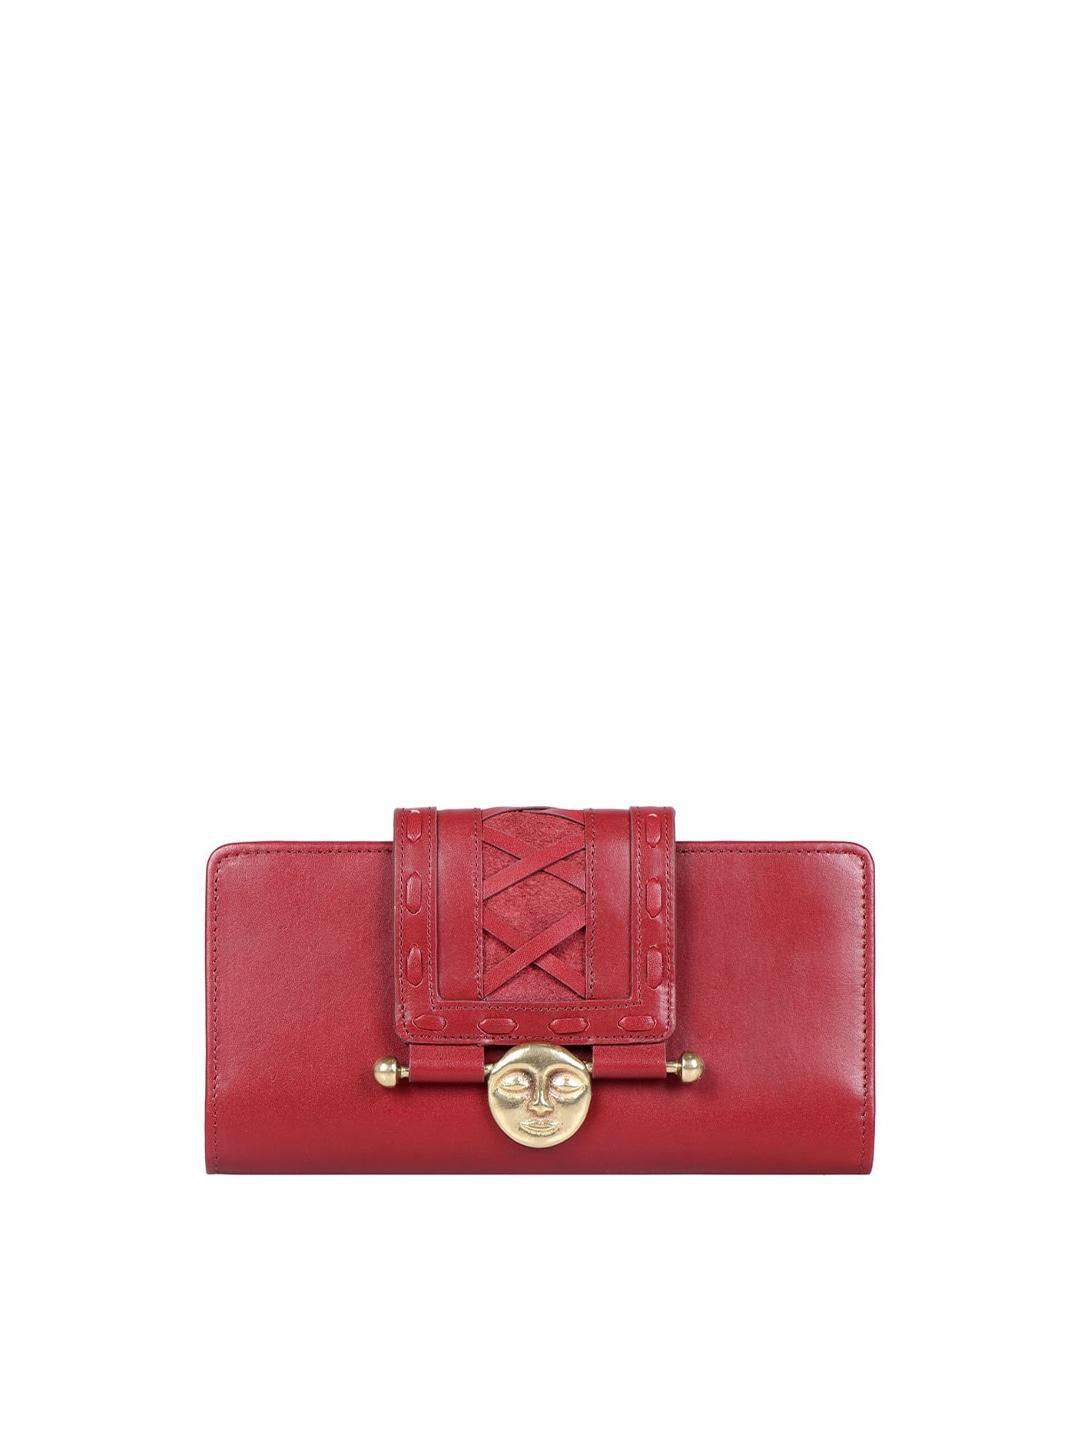 hidesign-women-red-two-fold-leather-wallet